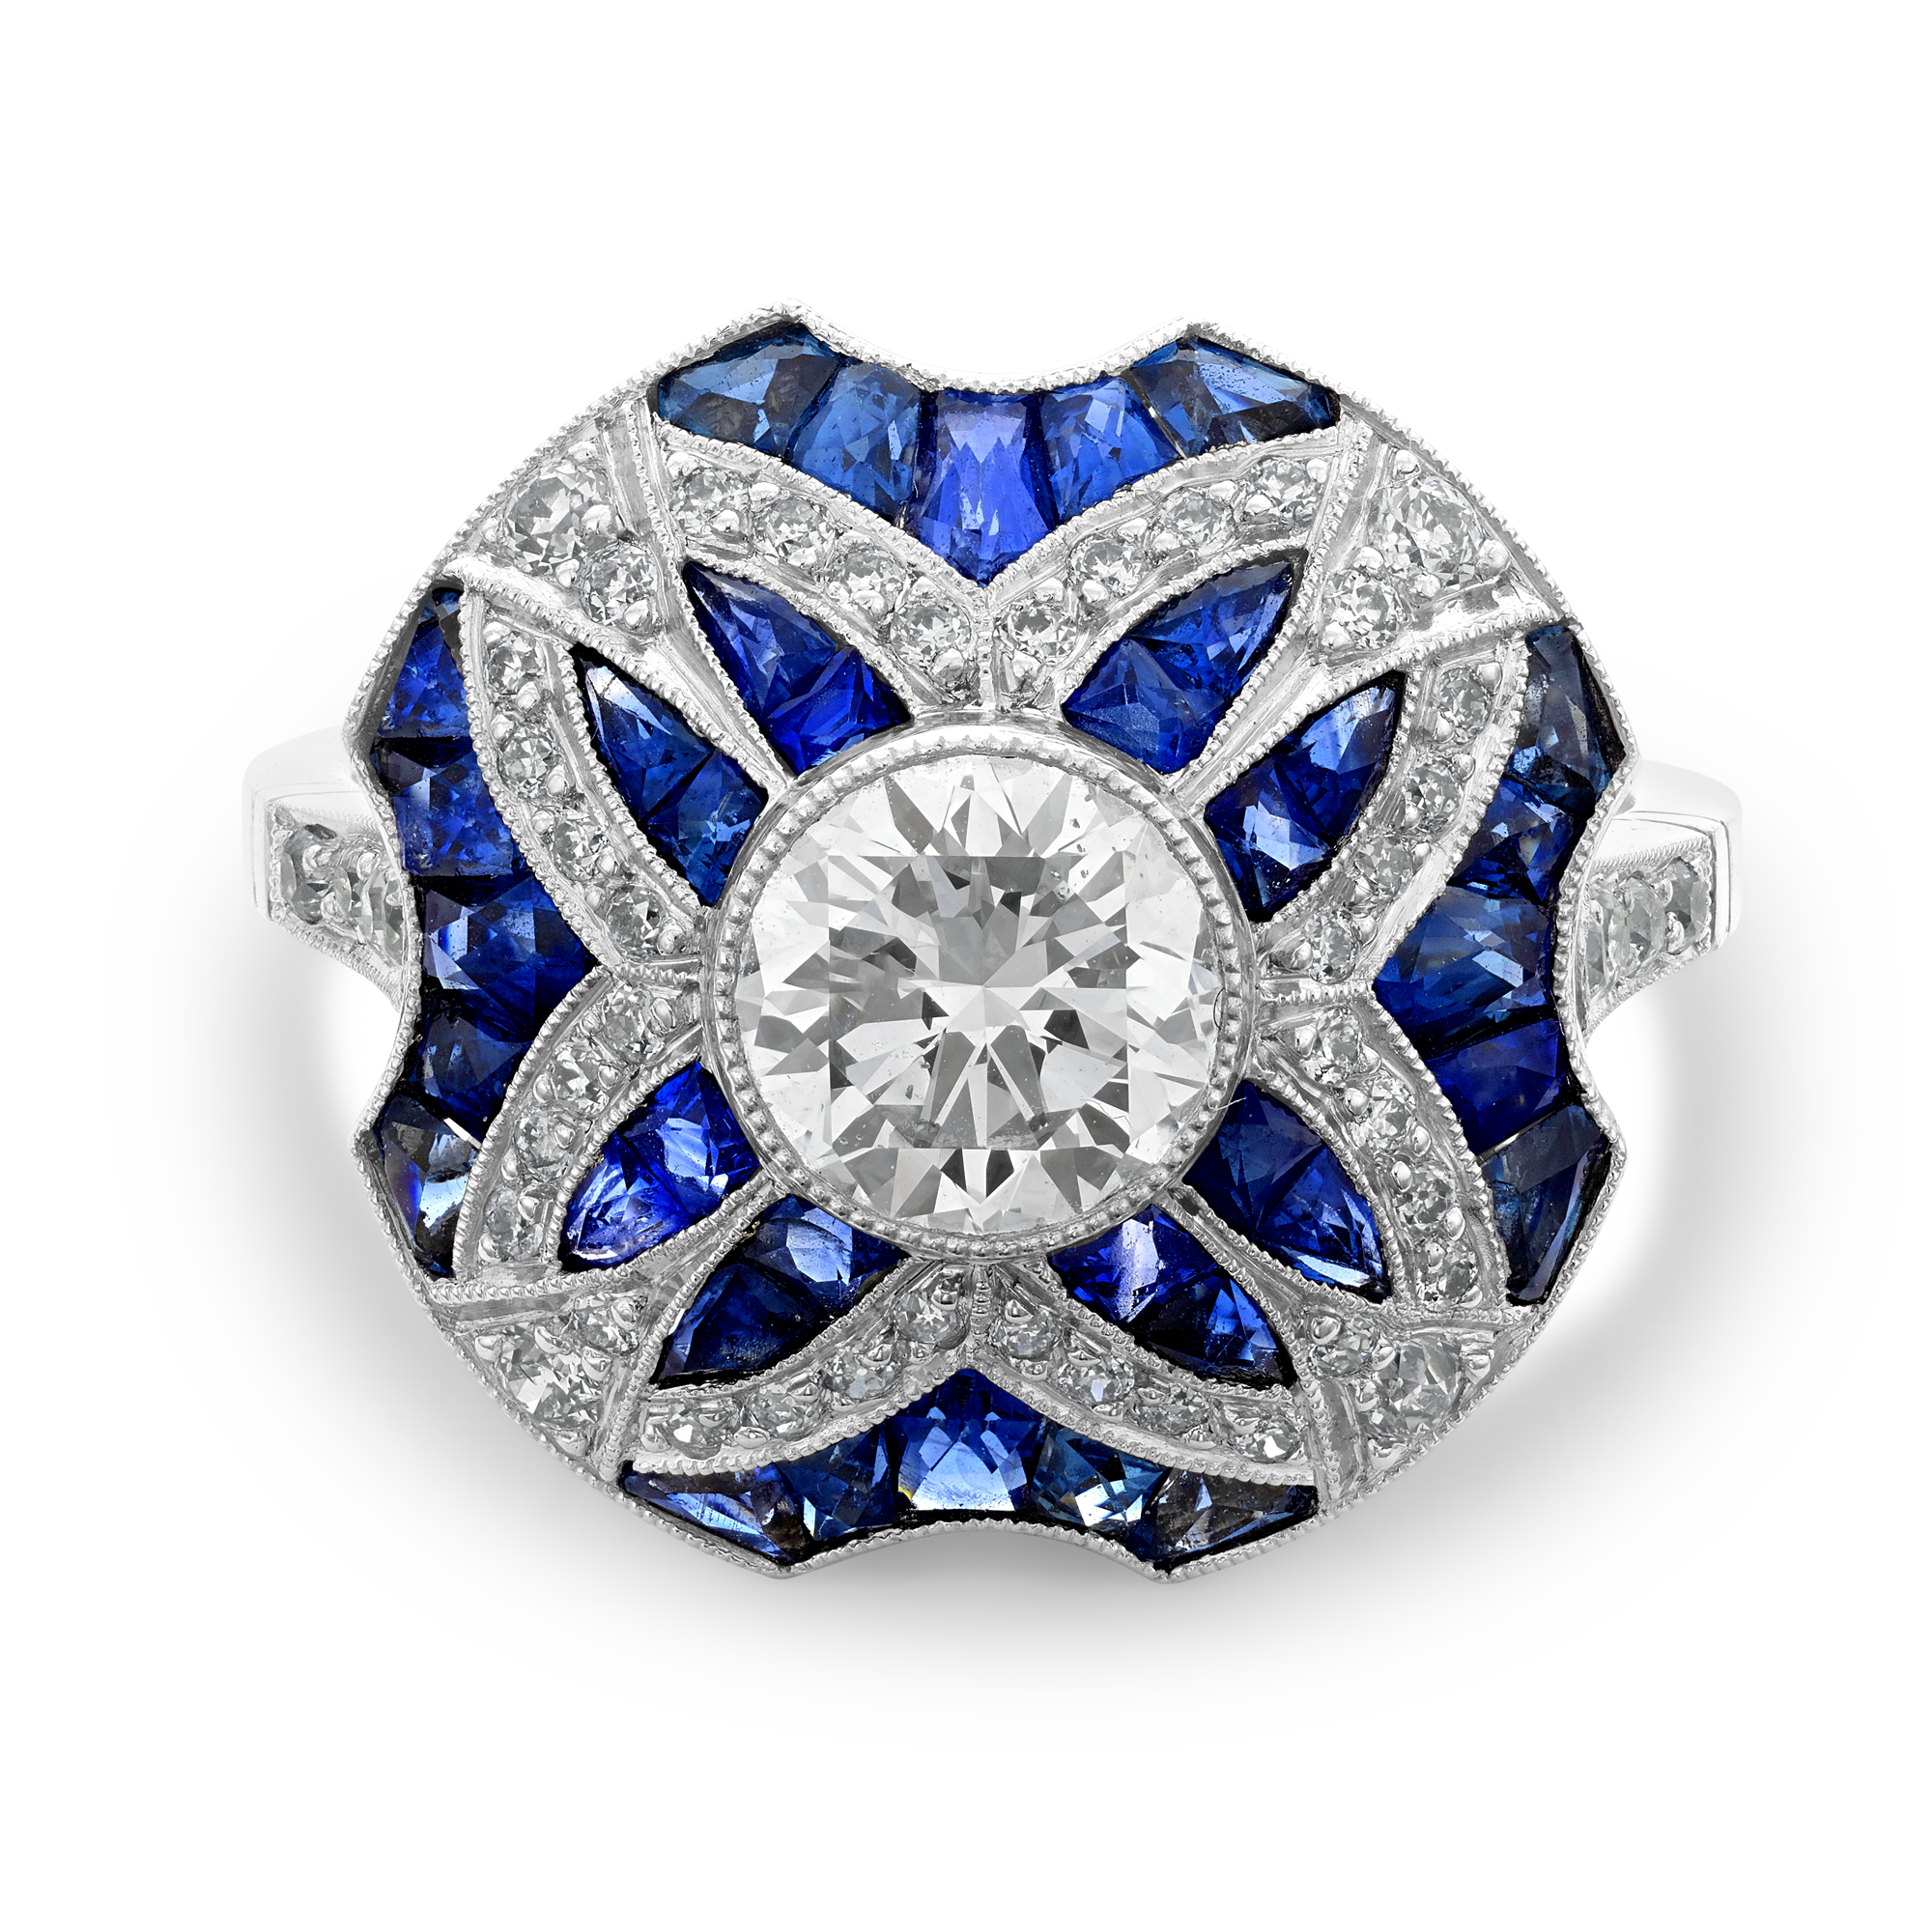 Art Deco Inspired Diamond and Calibre Sapphire Dress Ring with Sapphire and Diamond surround Old Cut, Millegrain Set_2